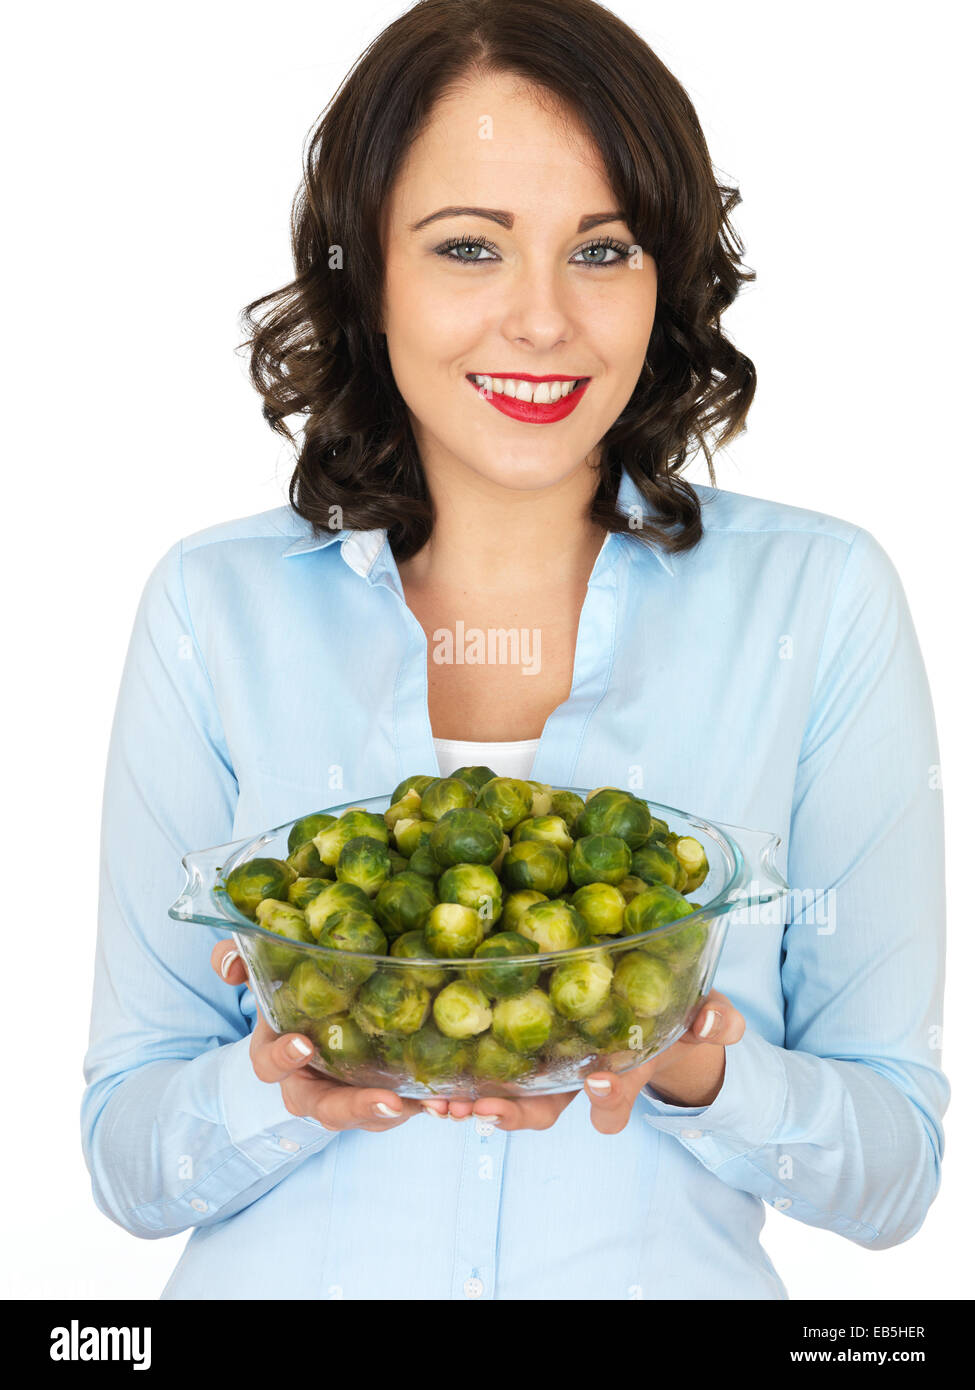 Young Woman Holding A Bowl Of Freshly Cooked Brussel Sprouts Vegetables Isolated Against A White Background Ready To Eat With A Clipping path Stock Photo